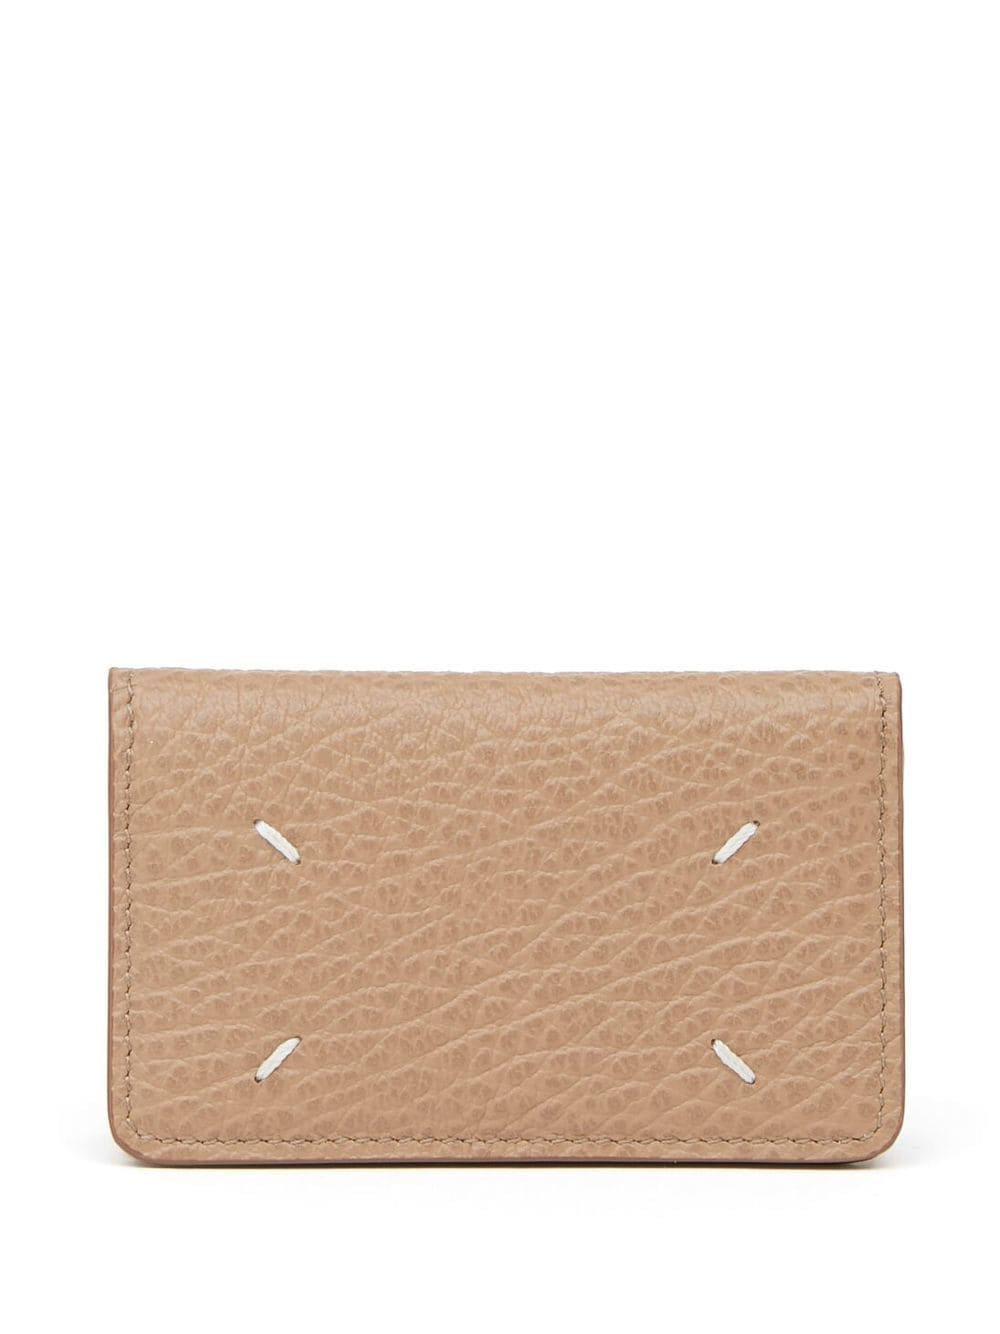 Maison Margiela Grained Leather Wallet In Brown